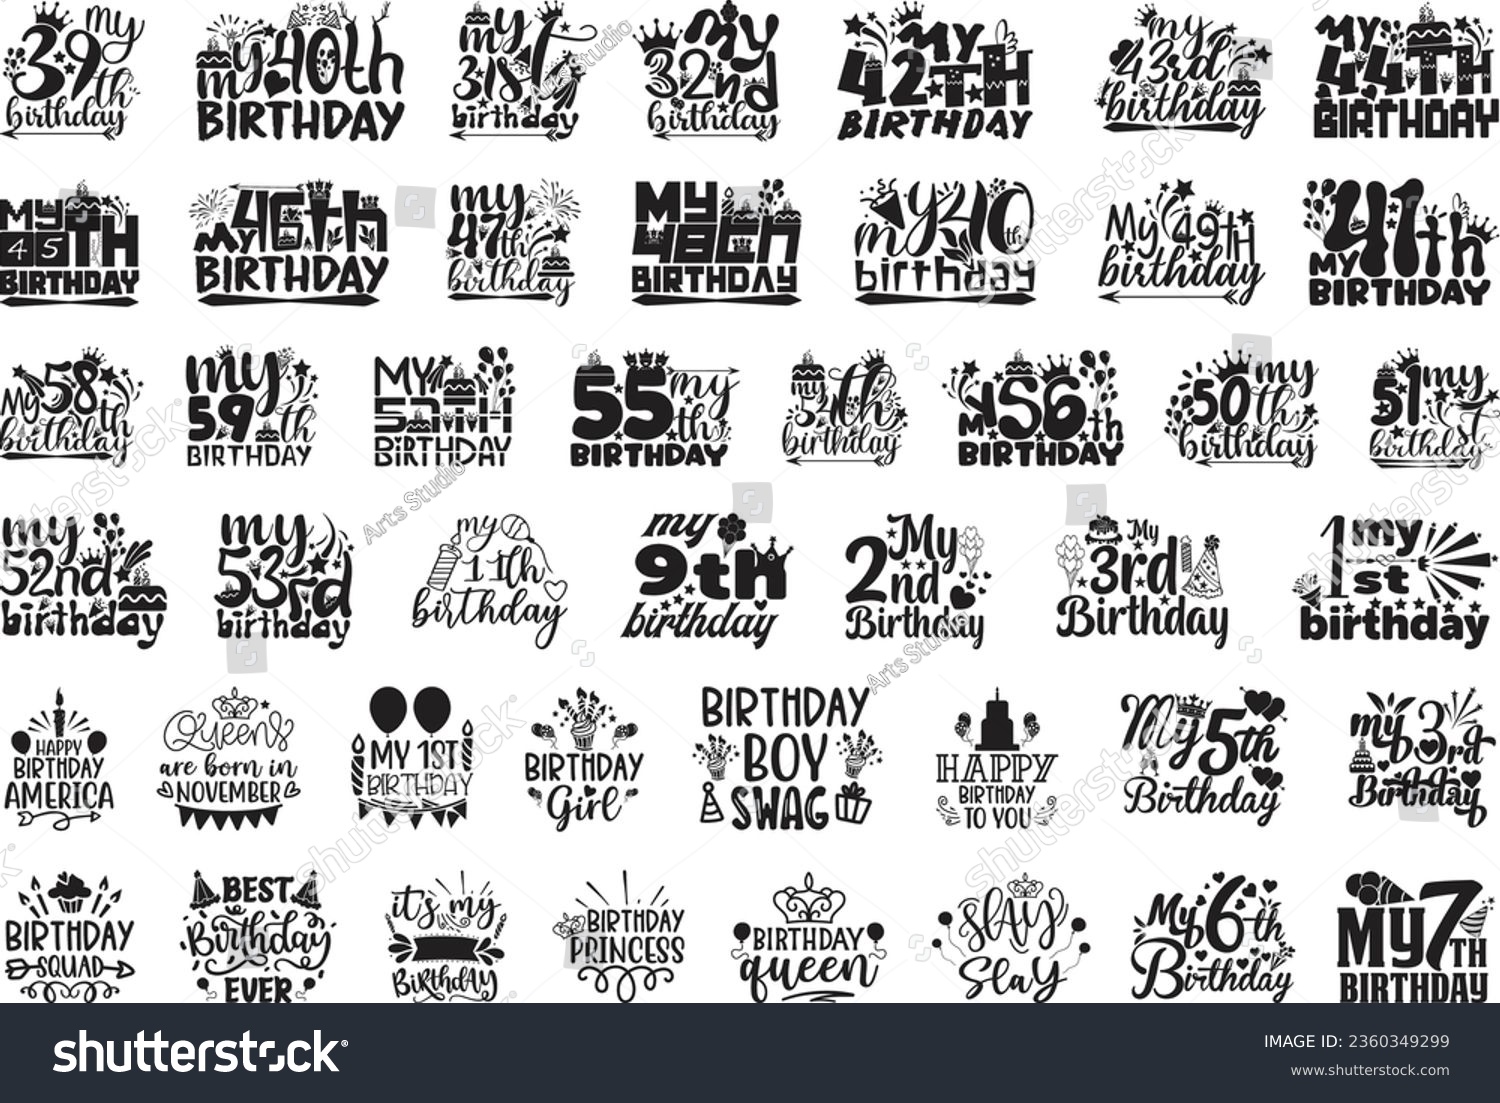 SVG of Happy Birthday T-shirt And SVG Design Bundle, Happy Birthday card design elements. Birthday party design for Vector graphic design. Vector EPS Editable File Bundle, can you download this bundle svg